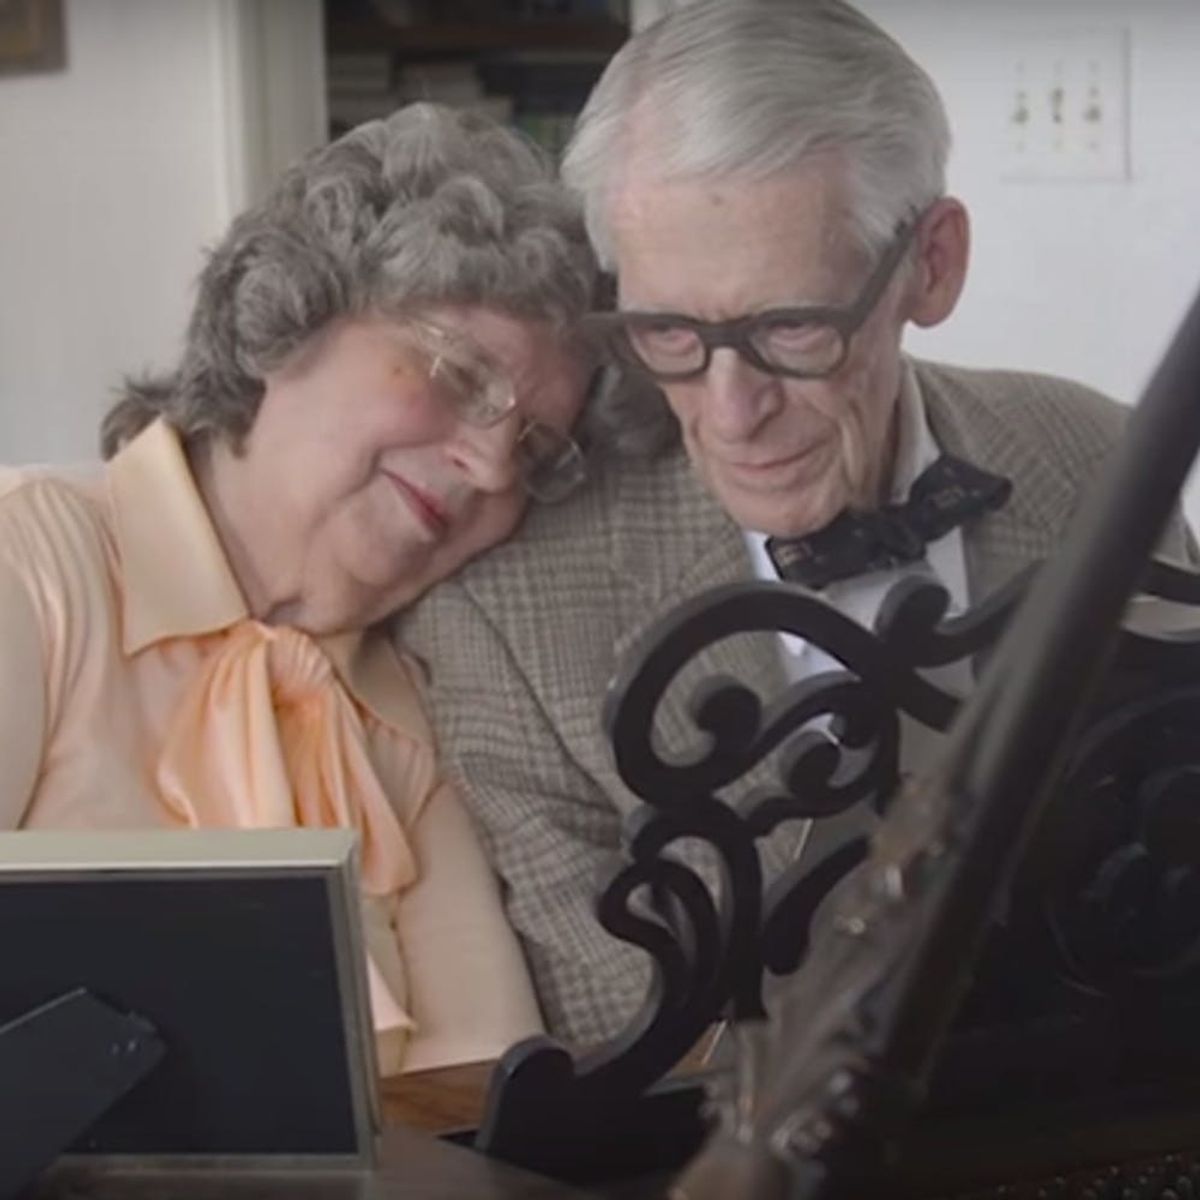 This Couple’s Up Themed Anniversary Video Is the Epitome of #RelationshipGoals